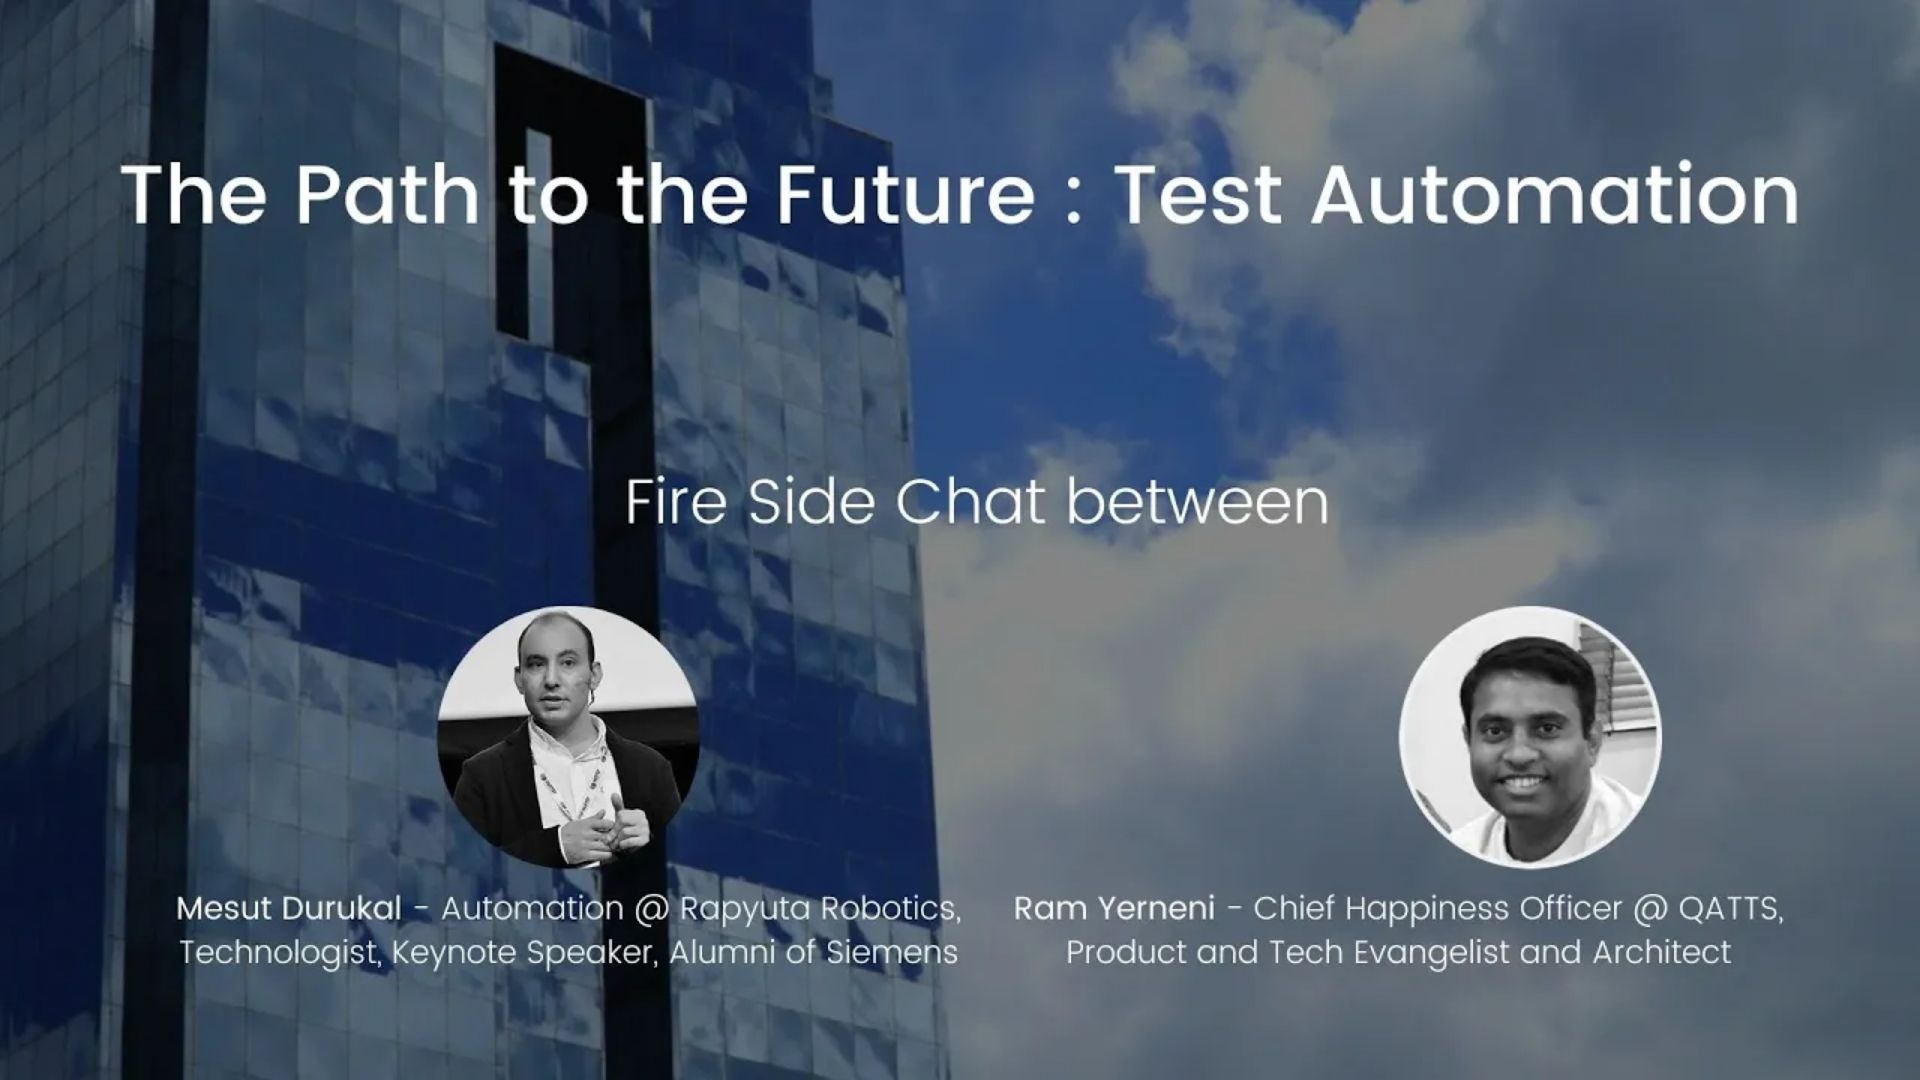 Test Automation - Fire Side Chat